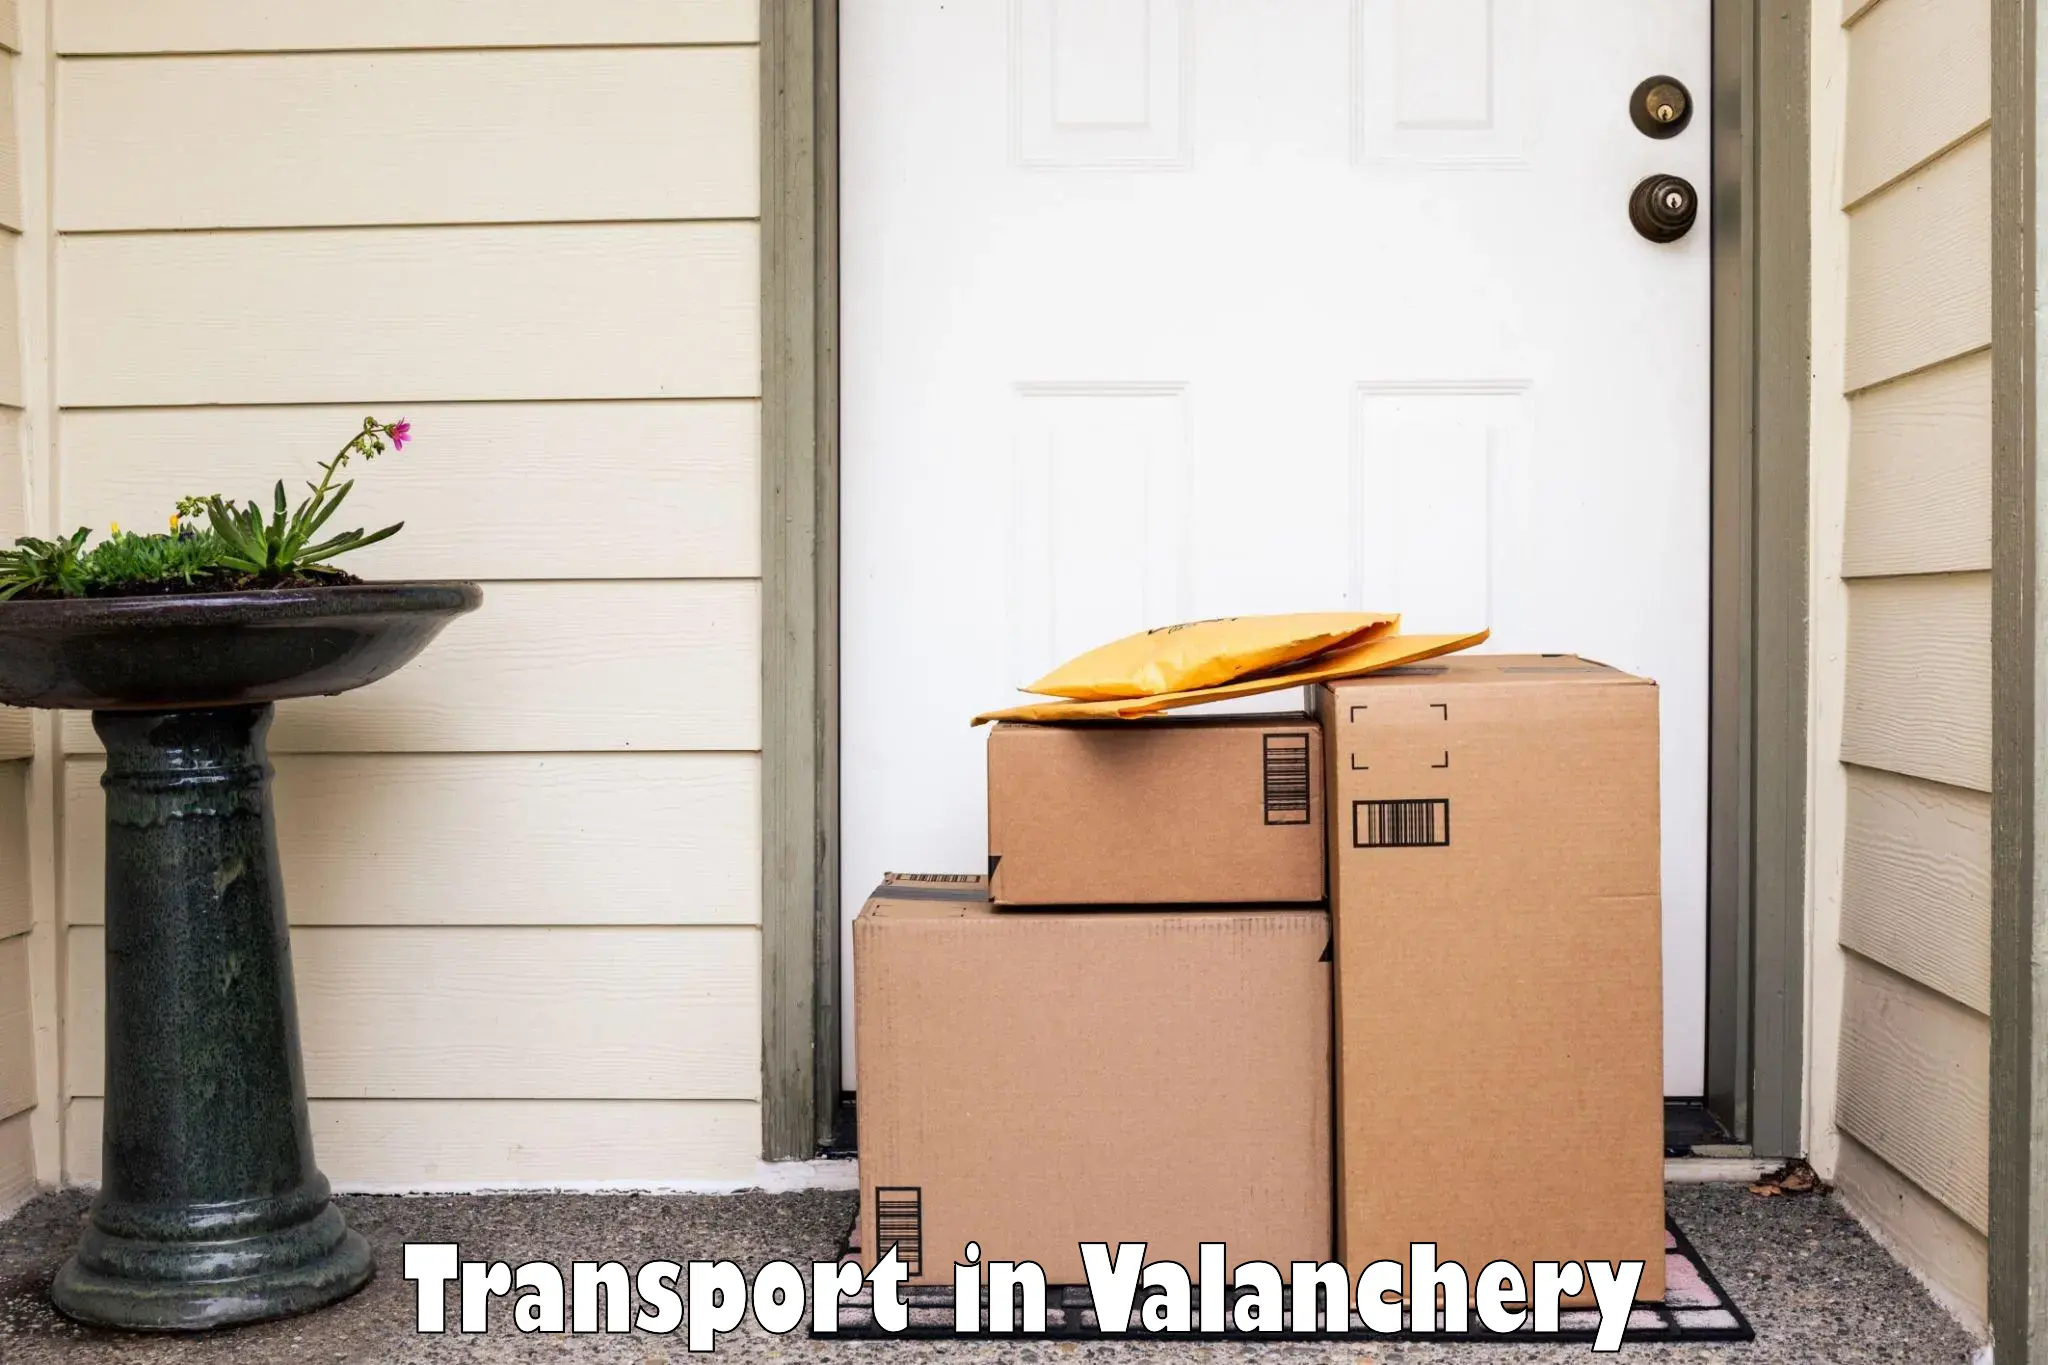 Road transport services in Valanchery